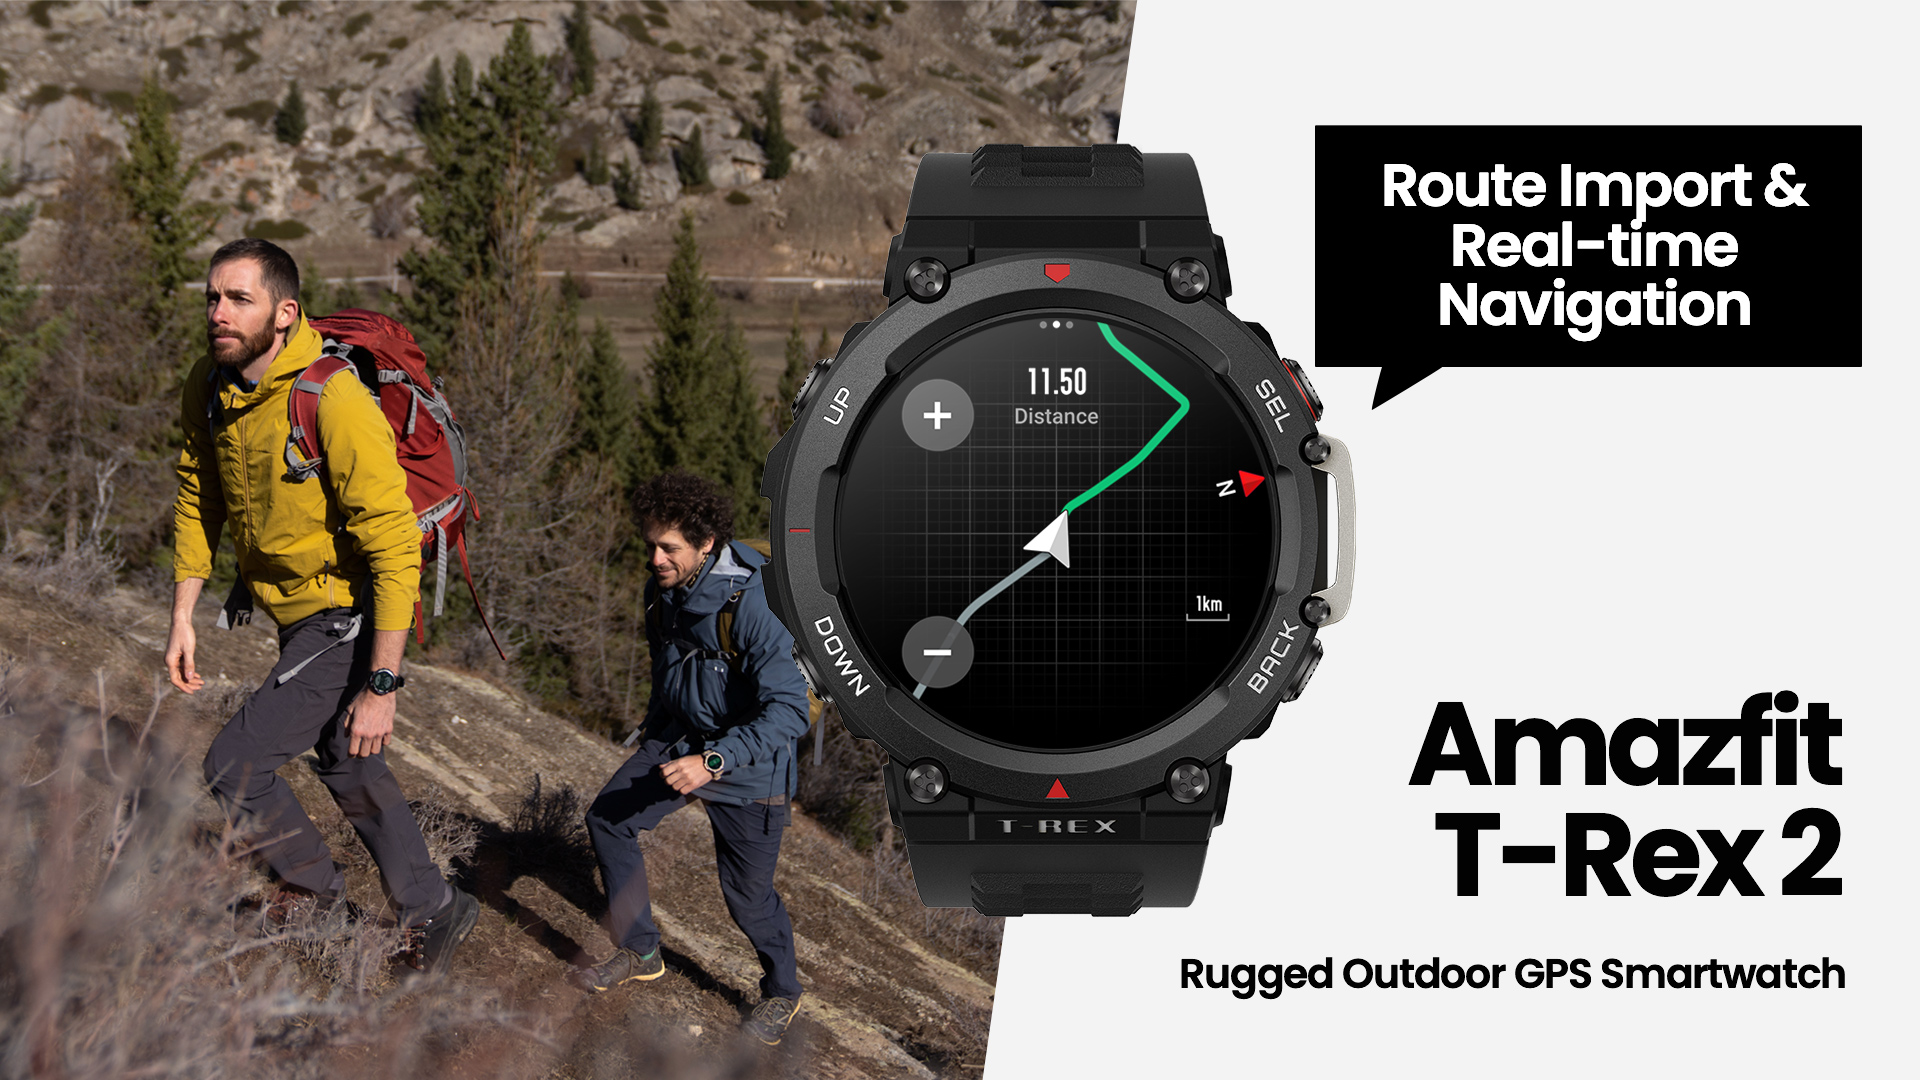 Amazfit T-Rex 2 Smart Watch for Men, Dual-Band & 6 Satellite Positioning,  24-Day Battery Life, Ultra-Low Temperature Operation, Rugged Outdoor GPS  Military Smartwatch, Real-time Navigation-Black 